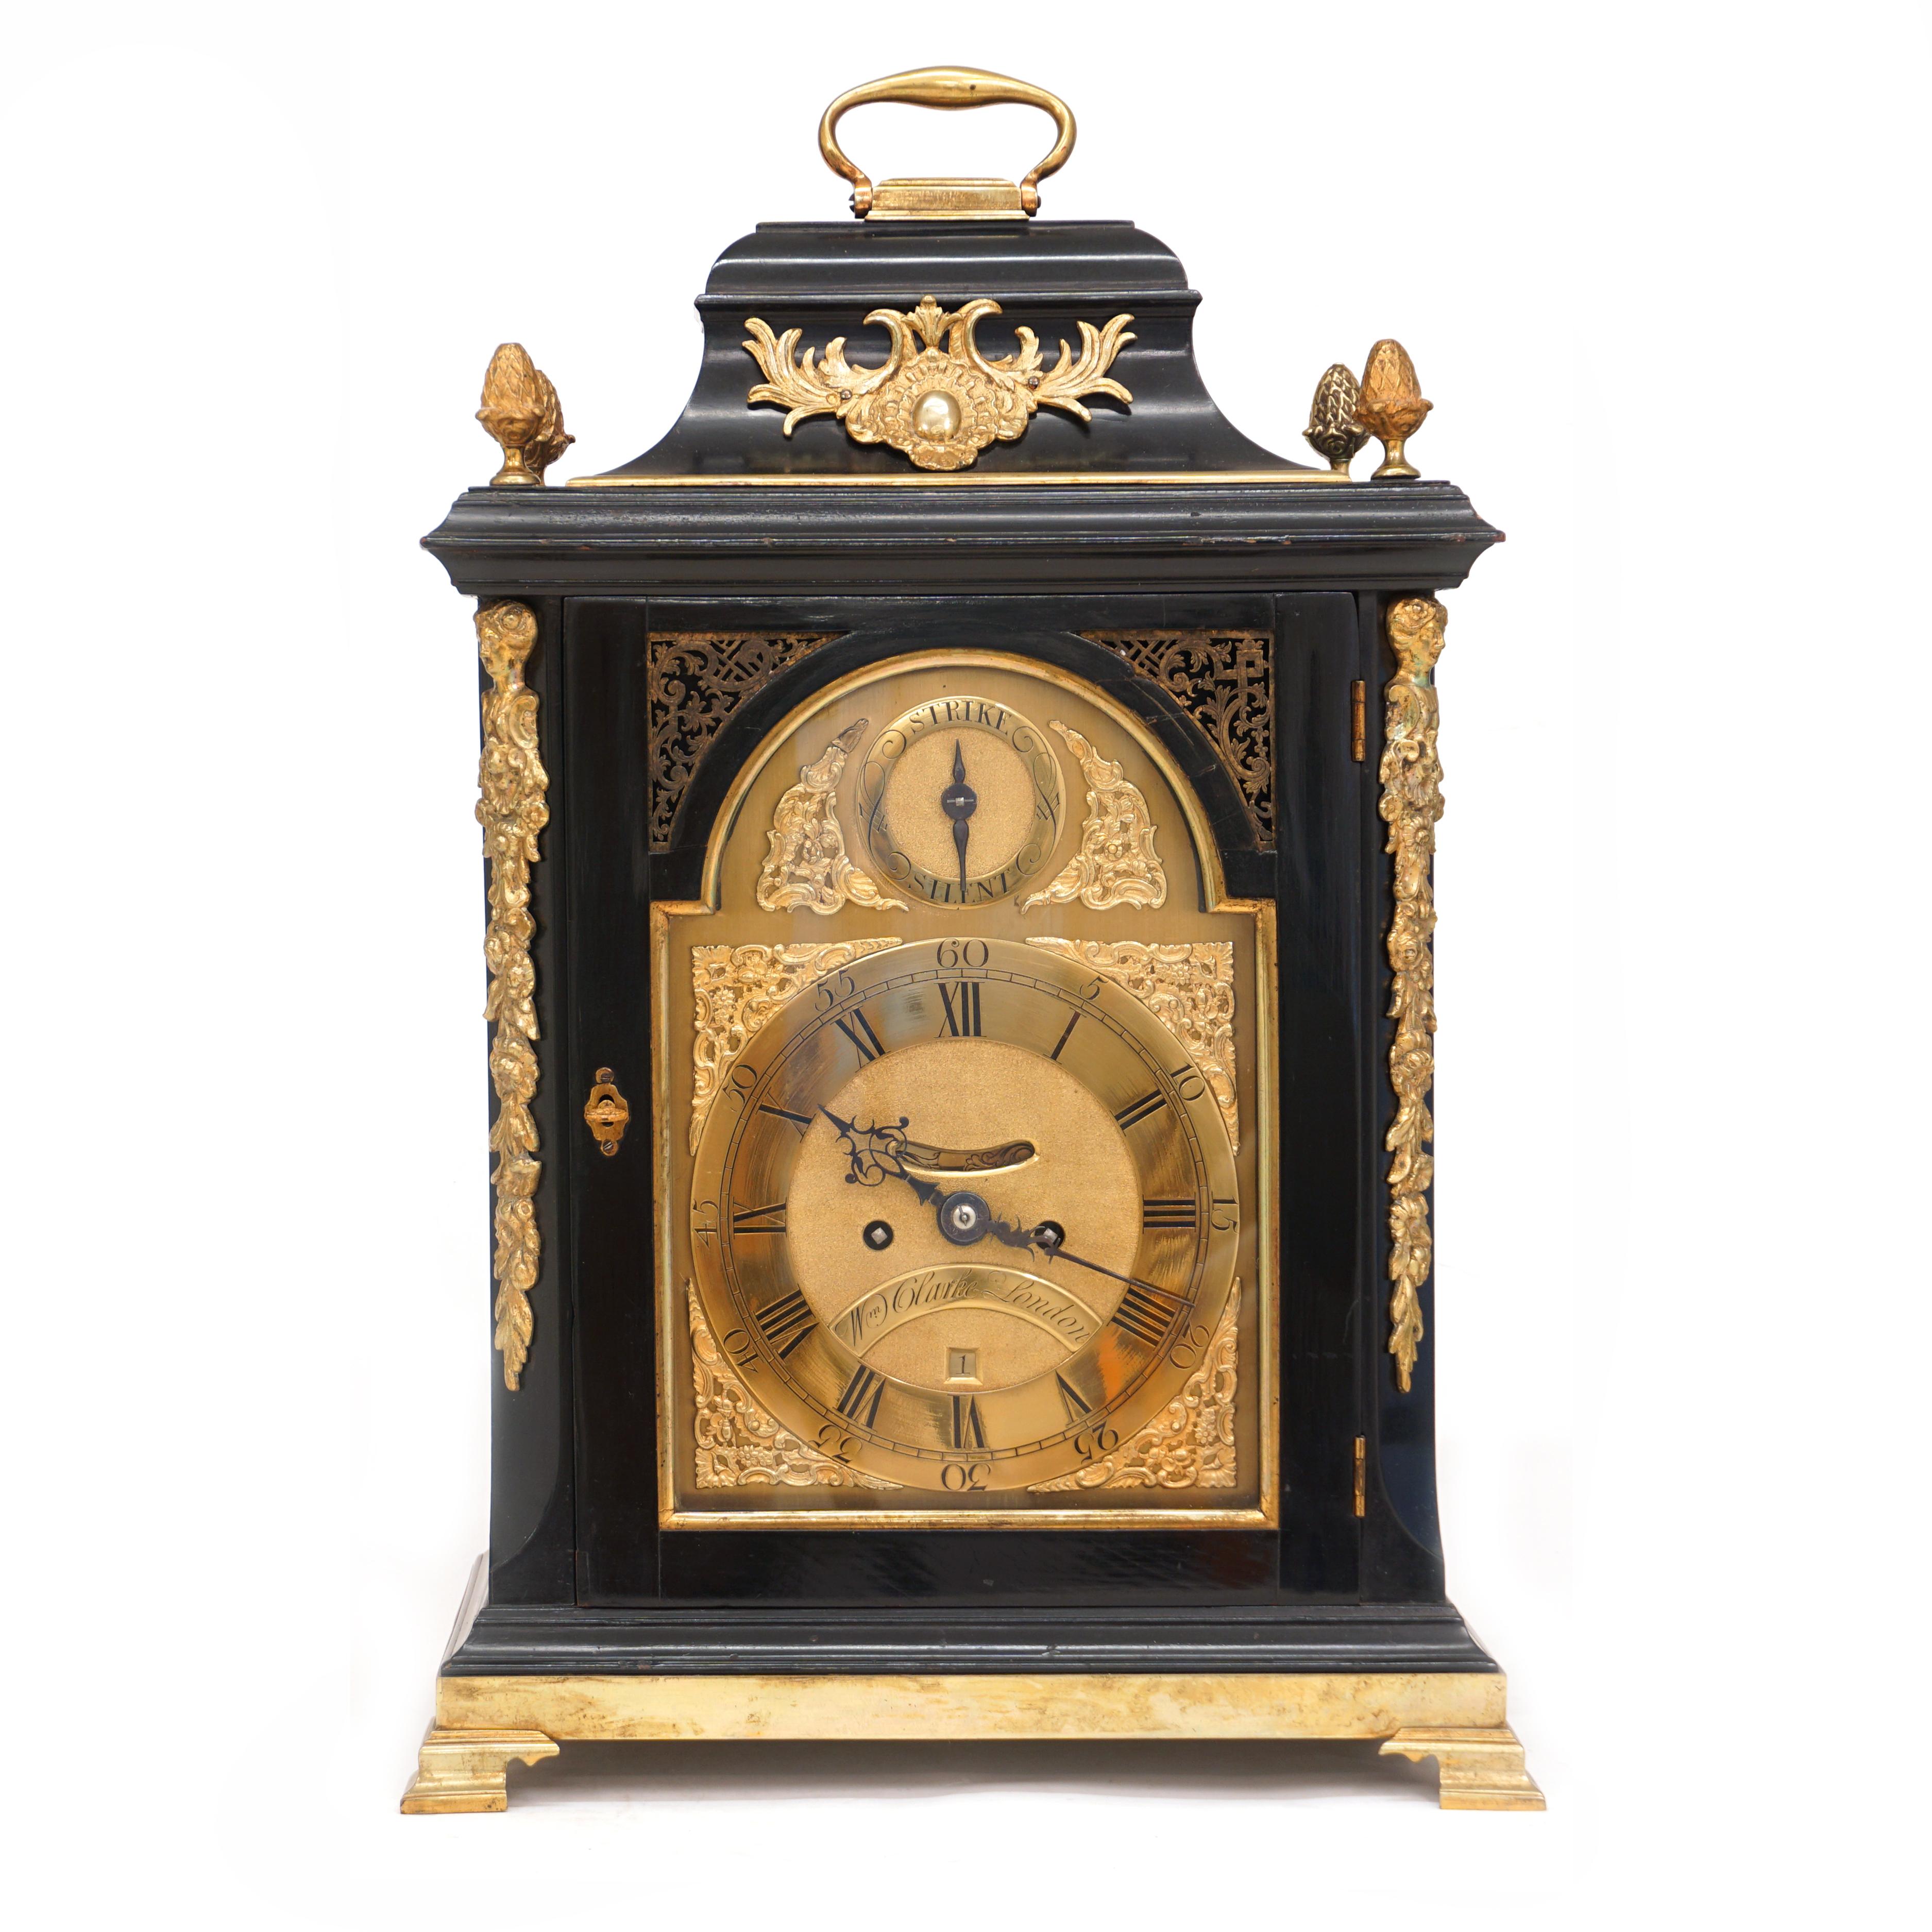 Large George III bracket clock made and signed by William Clarke London circa 1750-60
Solid brass plate movement, engraved
Stricking mechanism with on/off switch
Good condition.